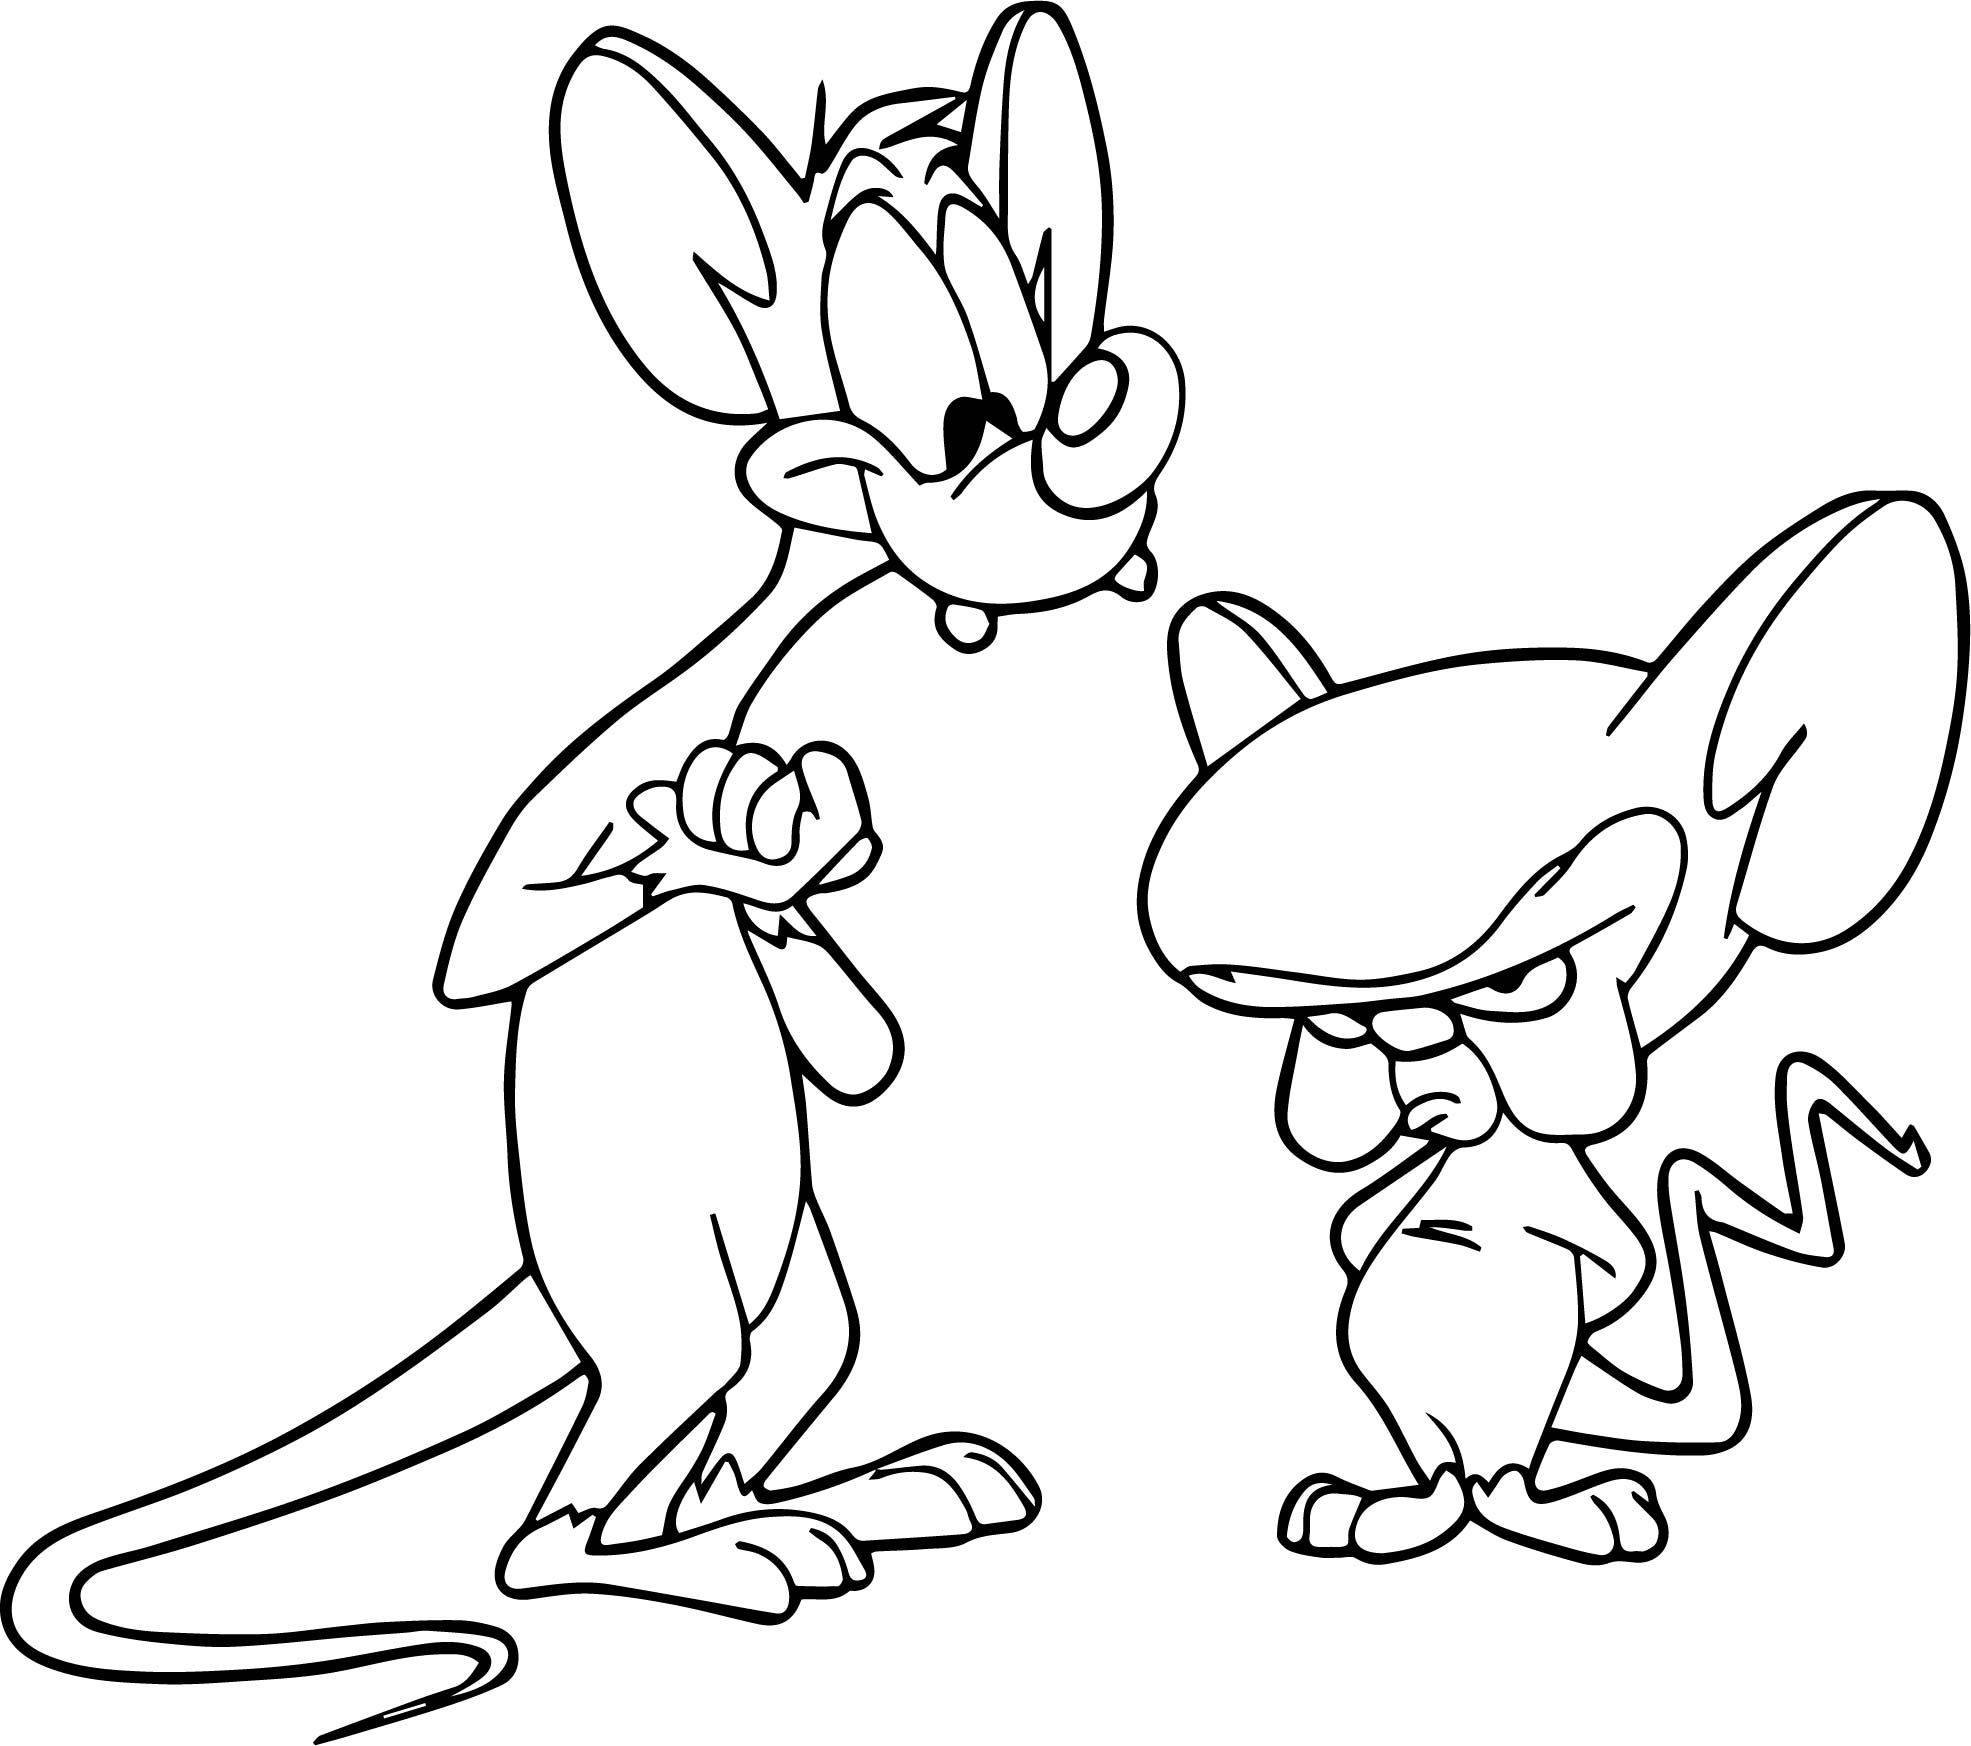 Pinky and the brain coloring pages